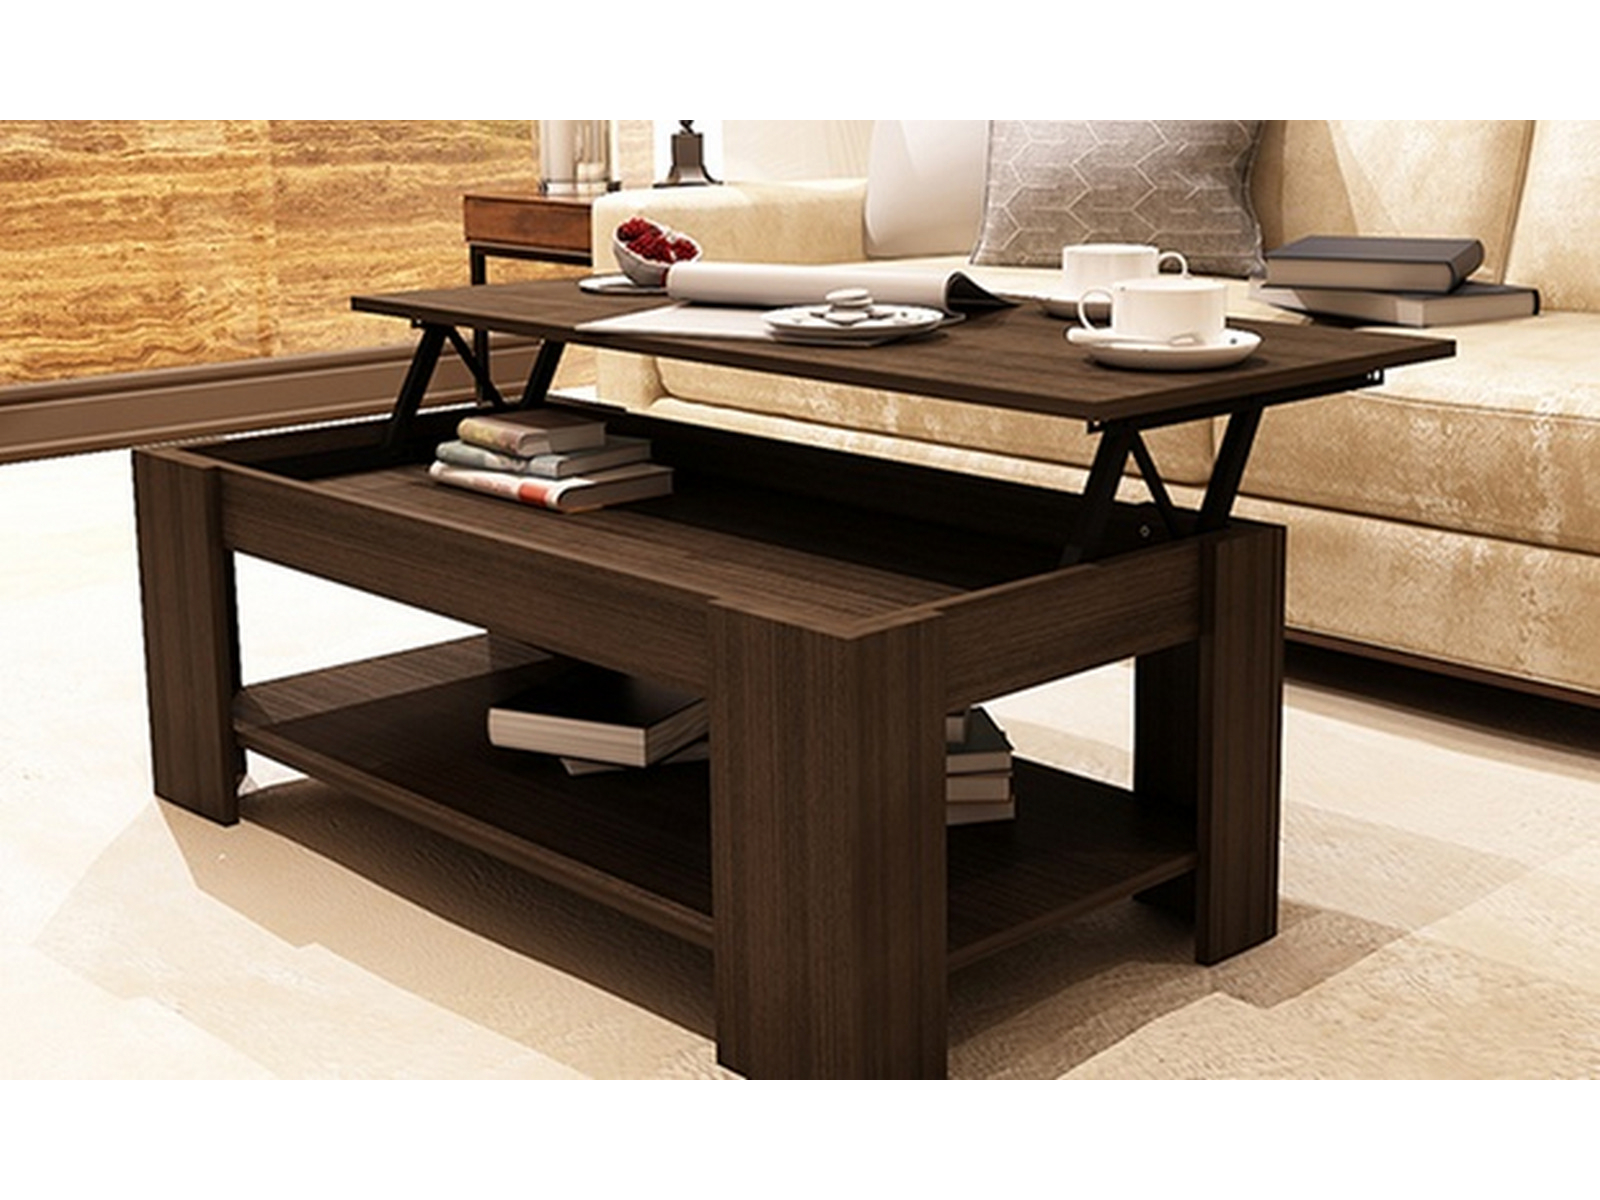 New Caspian Espresso Lift Up Top Coffee Table With Storage Shelf within measurements 1600 X 1200